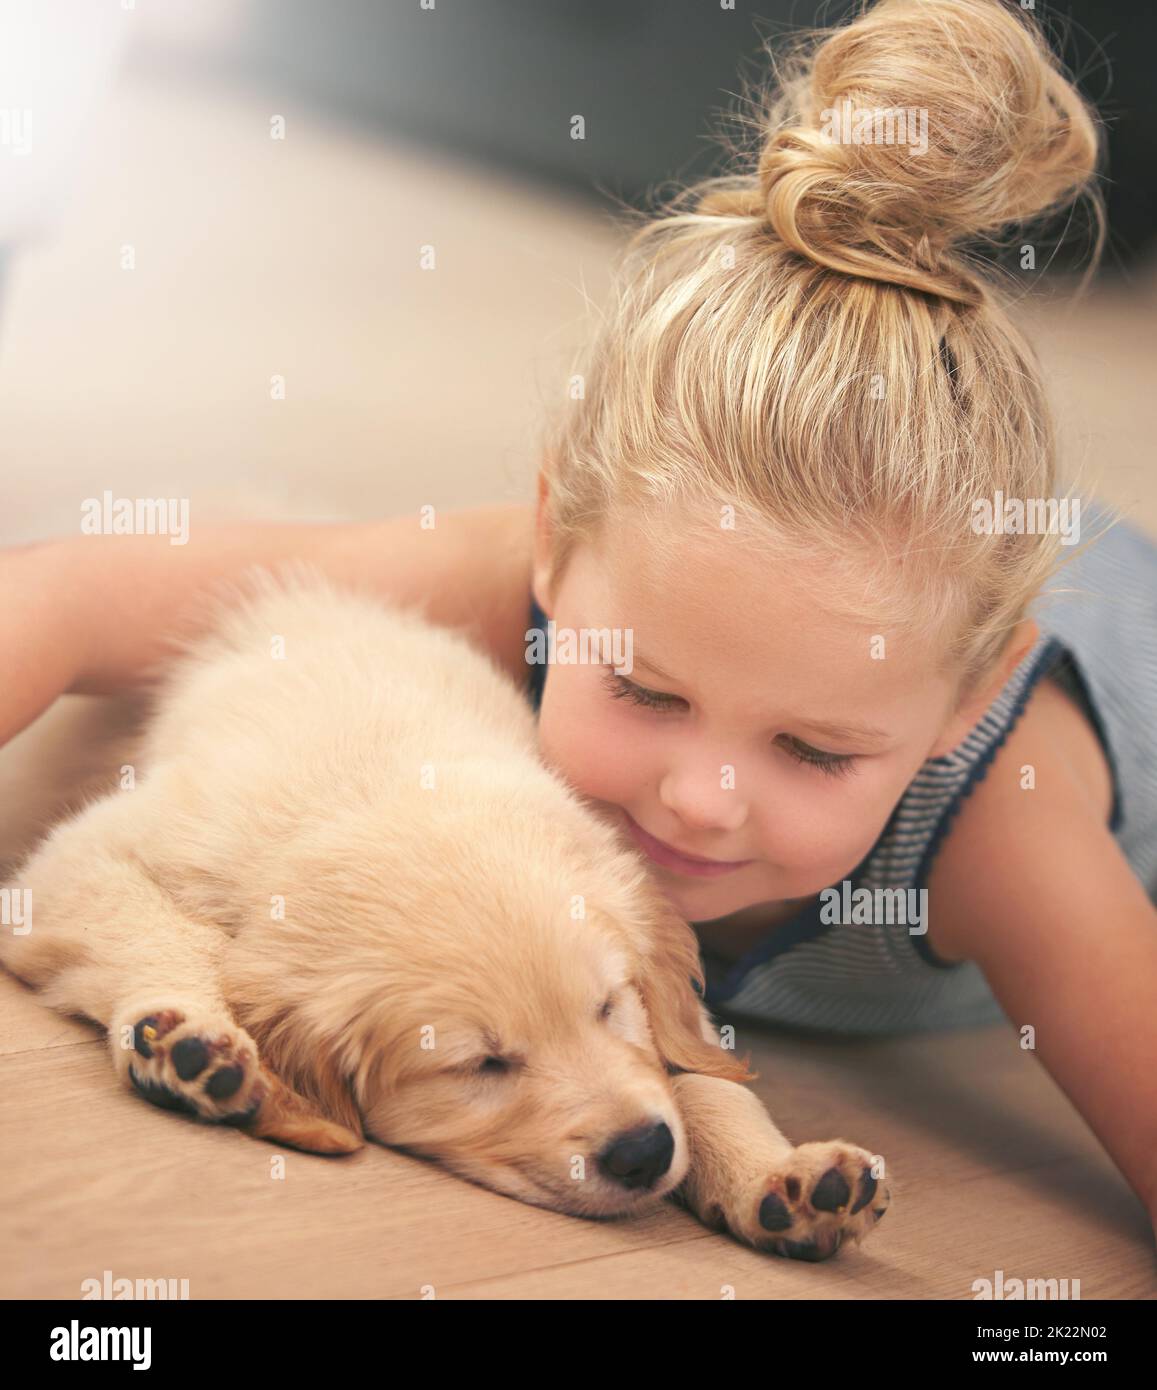 Loving and growing together. An adorable little girl with her puppy at home. Stock Photo